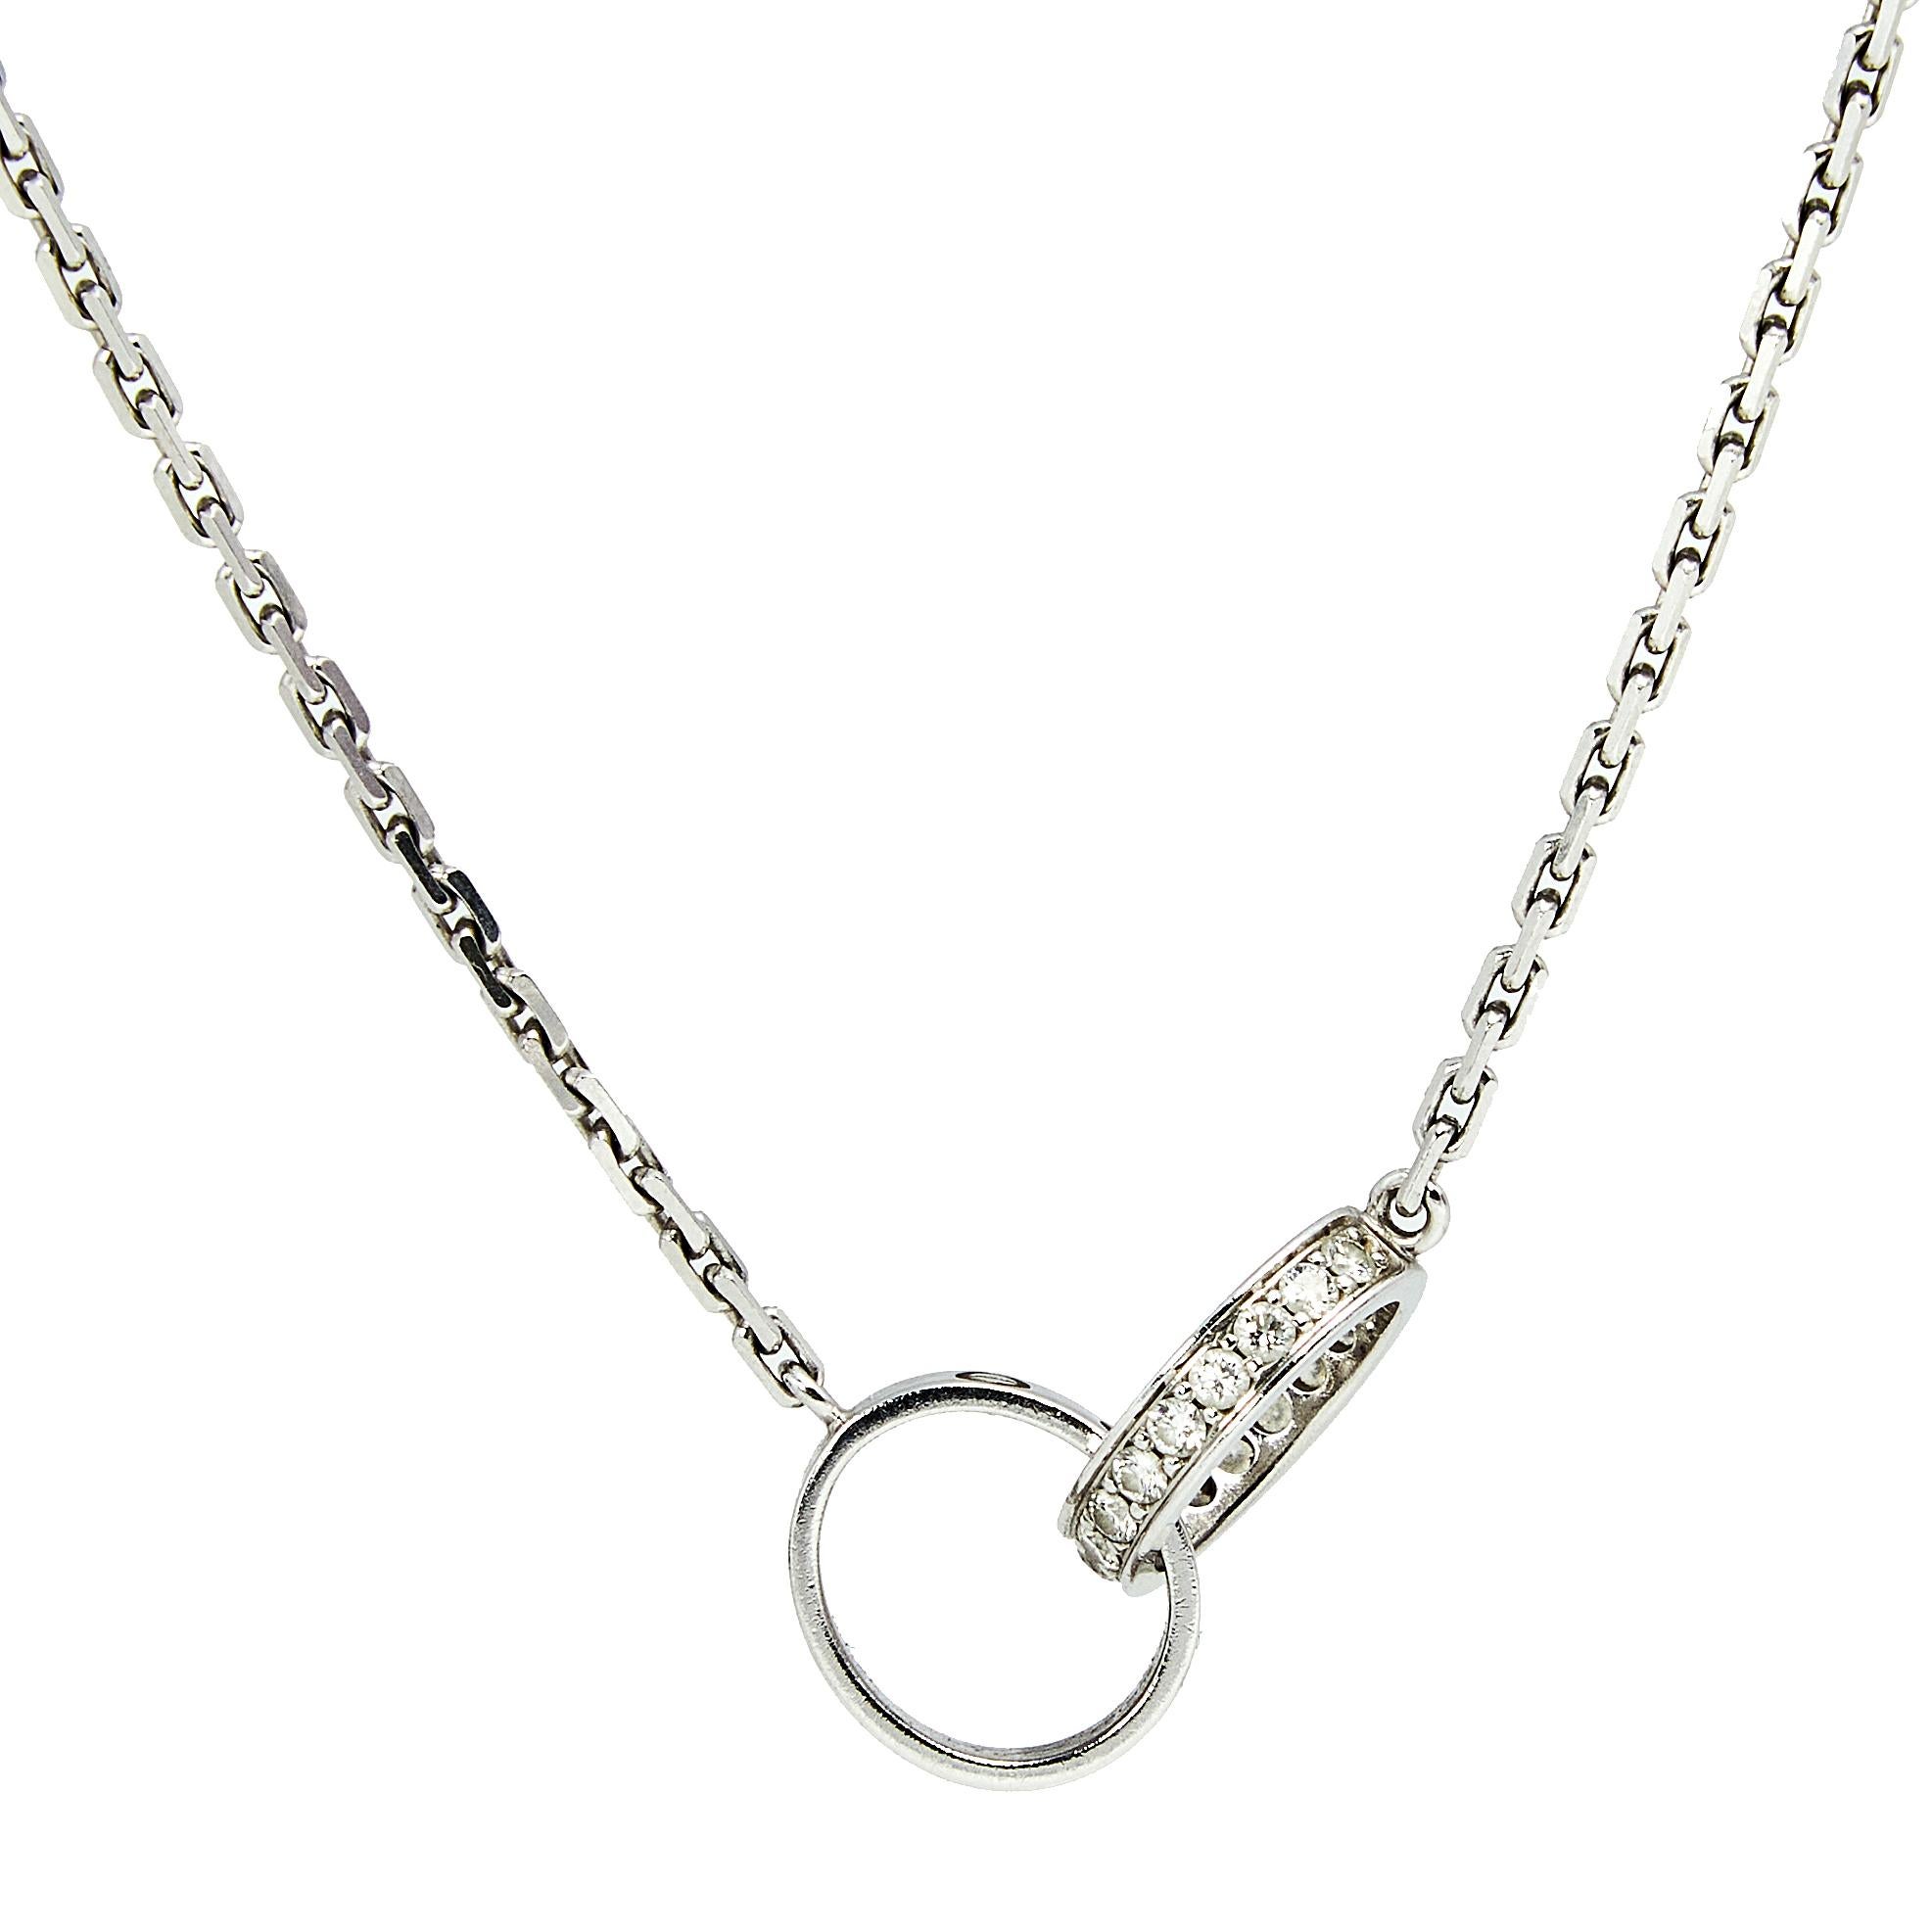 Celebrate timeless love with this necklace from Cartier's Love collection. It is made from 18k white gold and the chain holds two magnificent hoops interlocked with one another. One of the rings carries the iconic screw motifs—a signature of the